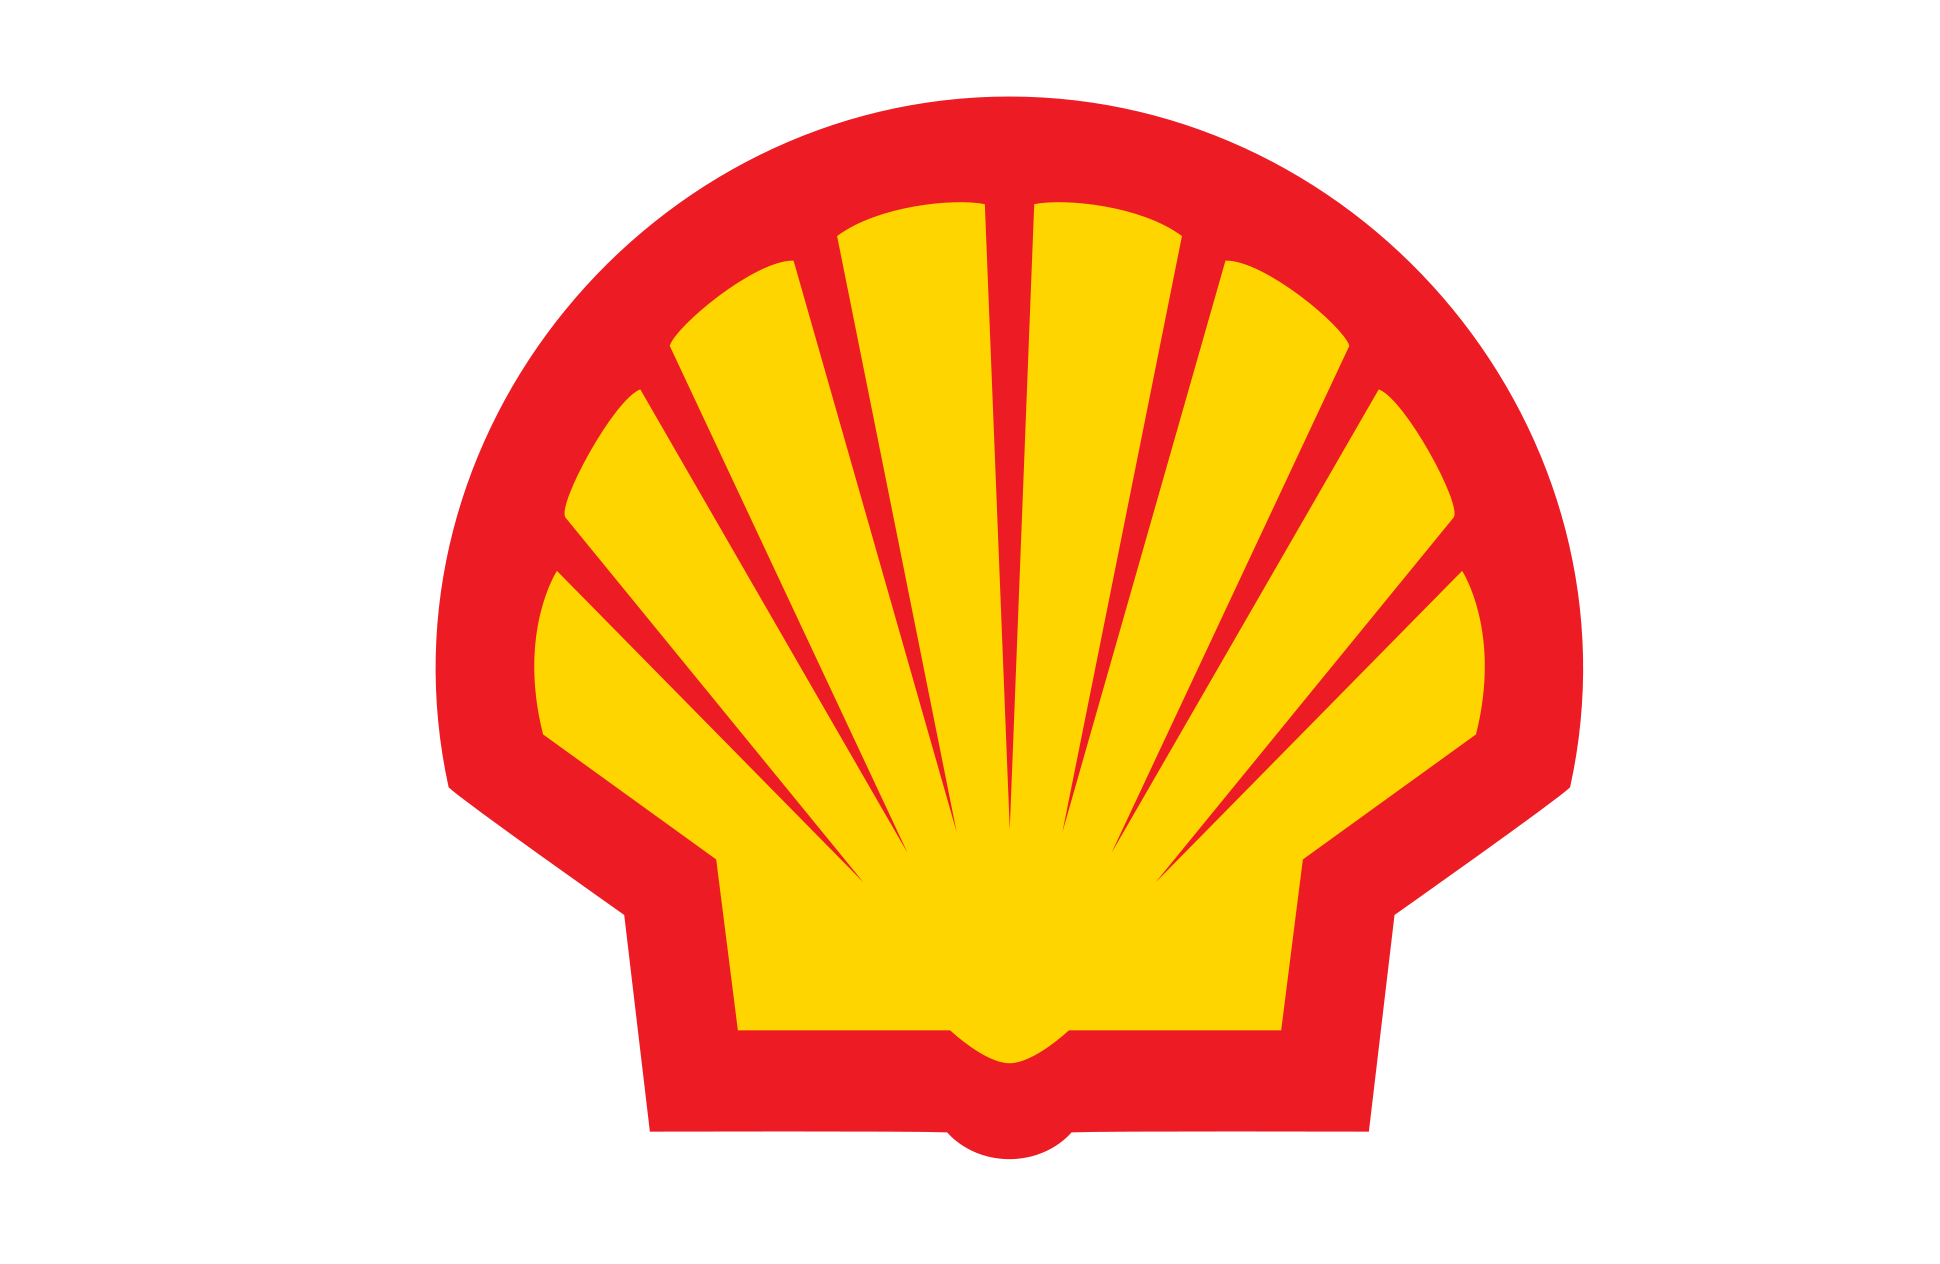 АЗС "SHELL"